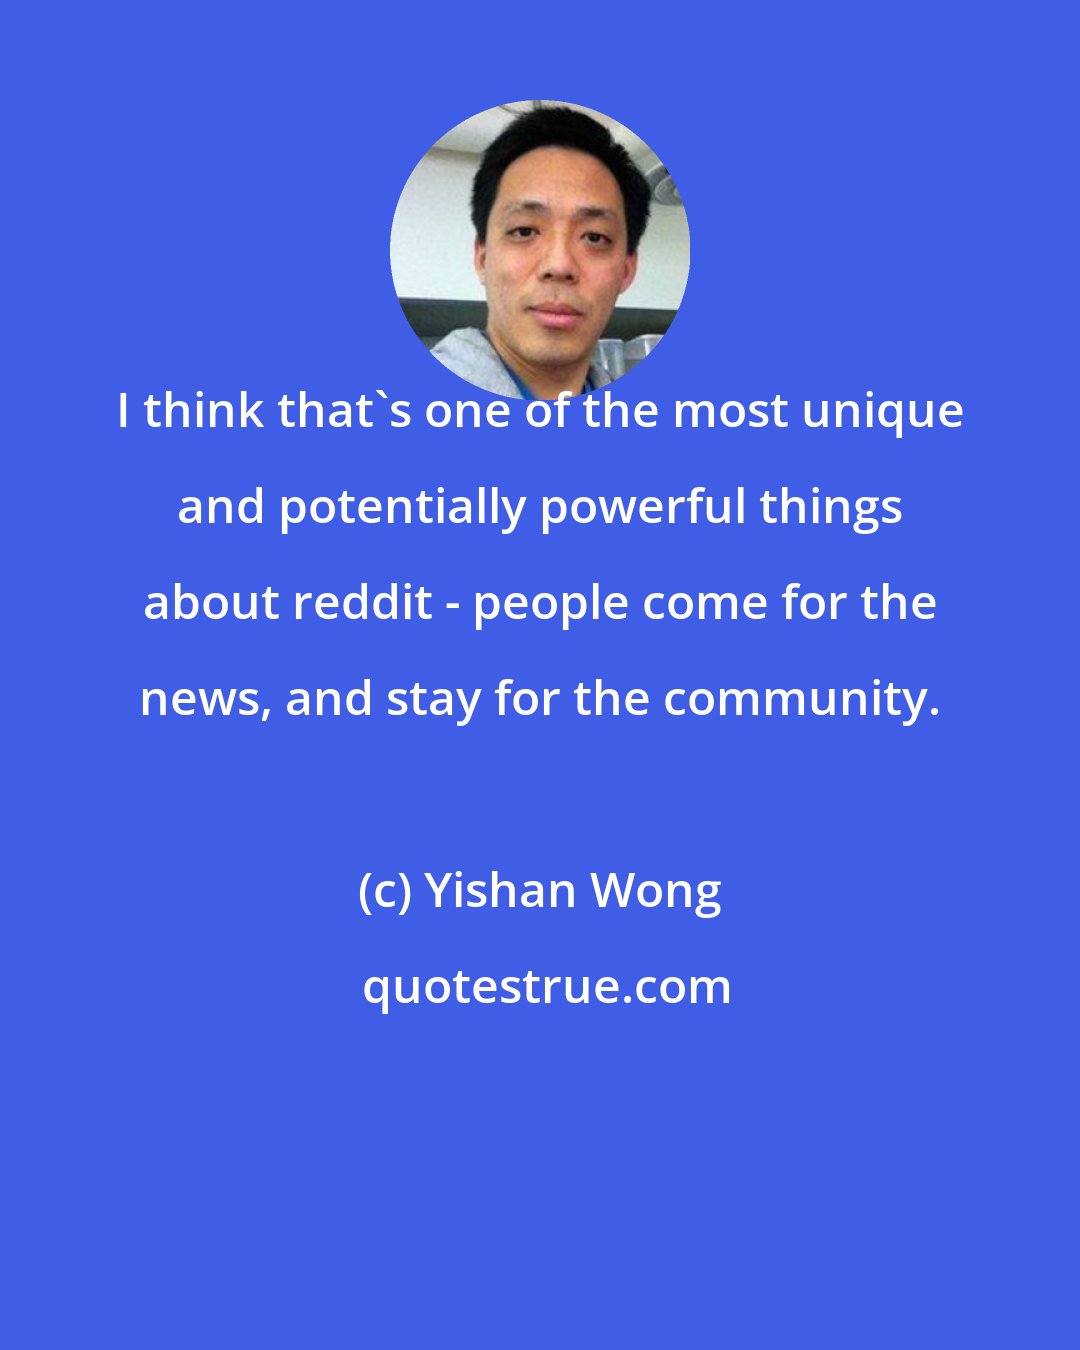 Yishan Wong: I think that's one of the most unique and potentially powerful things about reddit - people come for the news, and stay for the community.